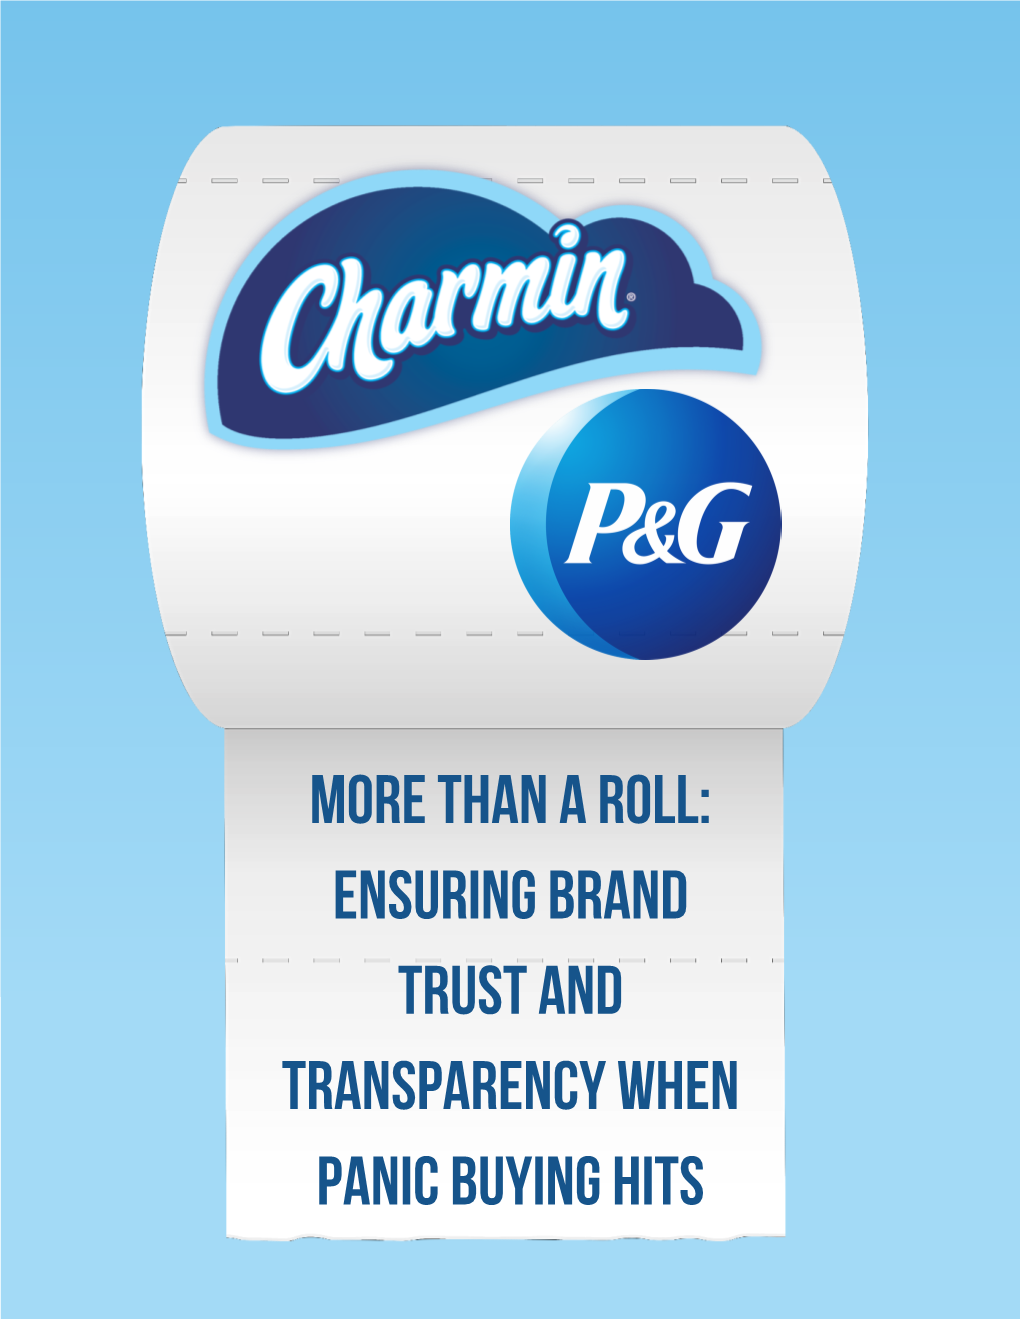 More Than a Roll: Ensuring Brand Trust and Transparency When Panic Buying Hits 1 Behind the Roll